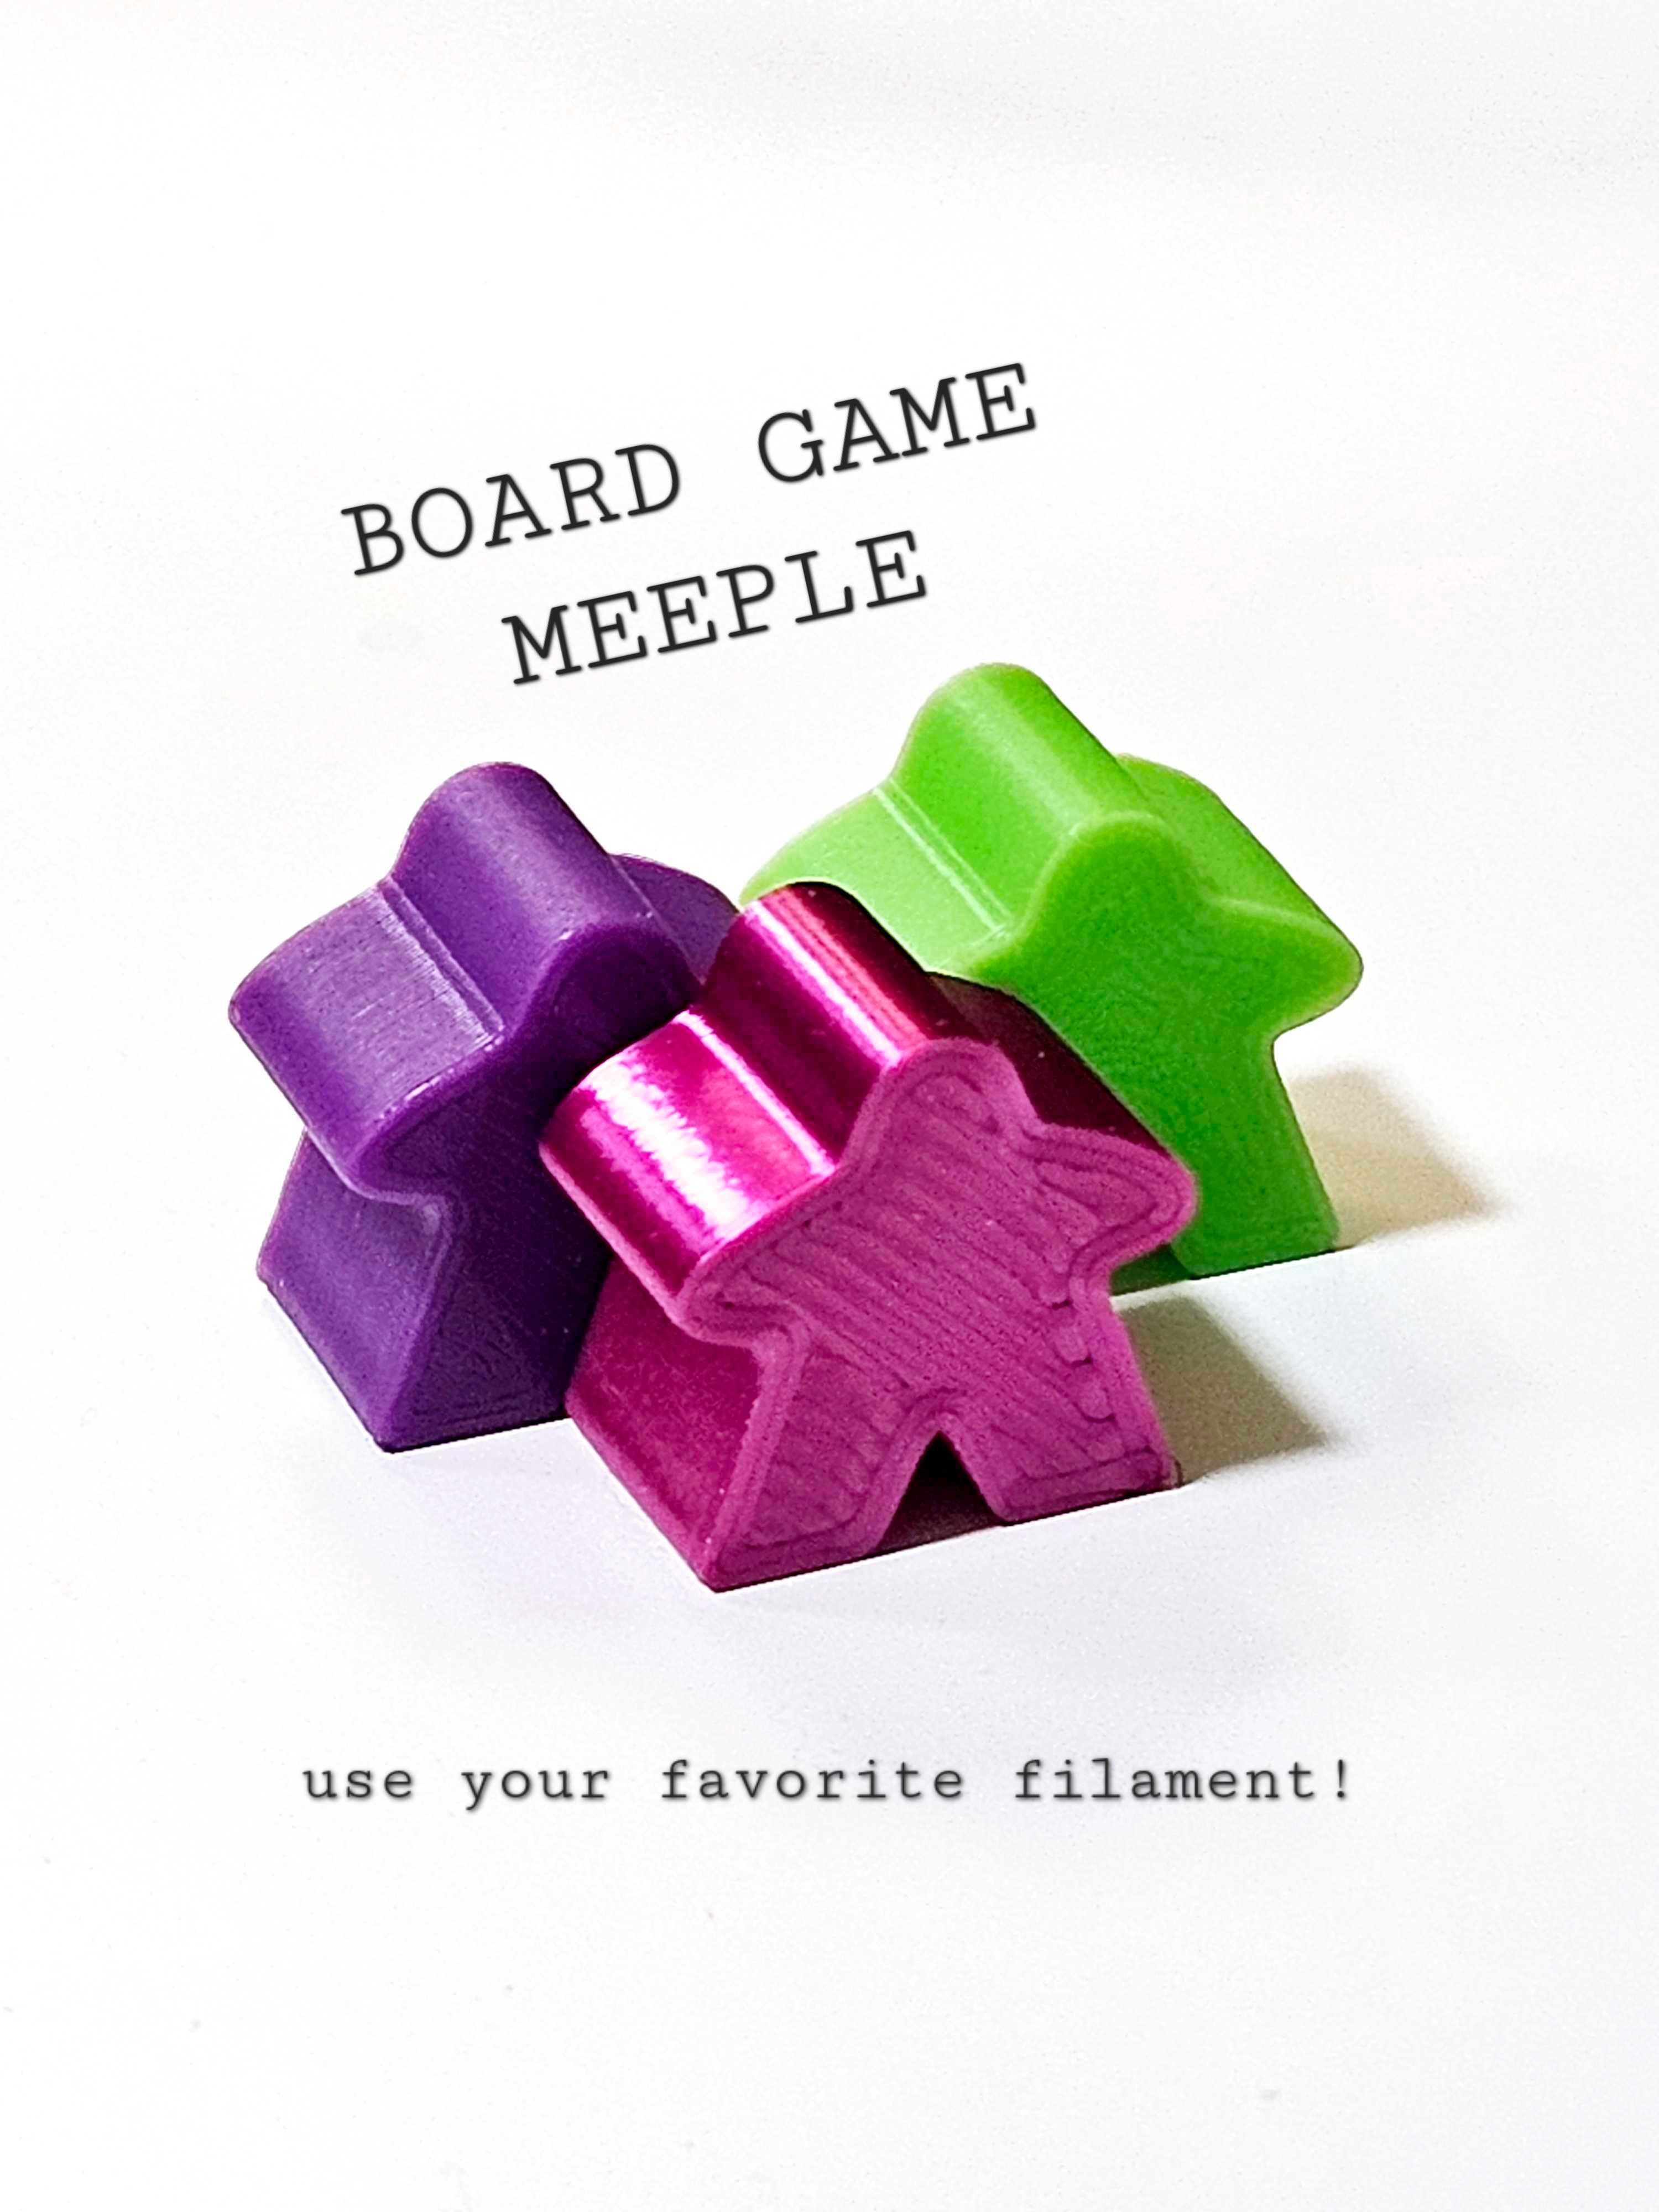 Meeple - Board game piece | Board game upgrades & replacement pieces 3d model